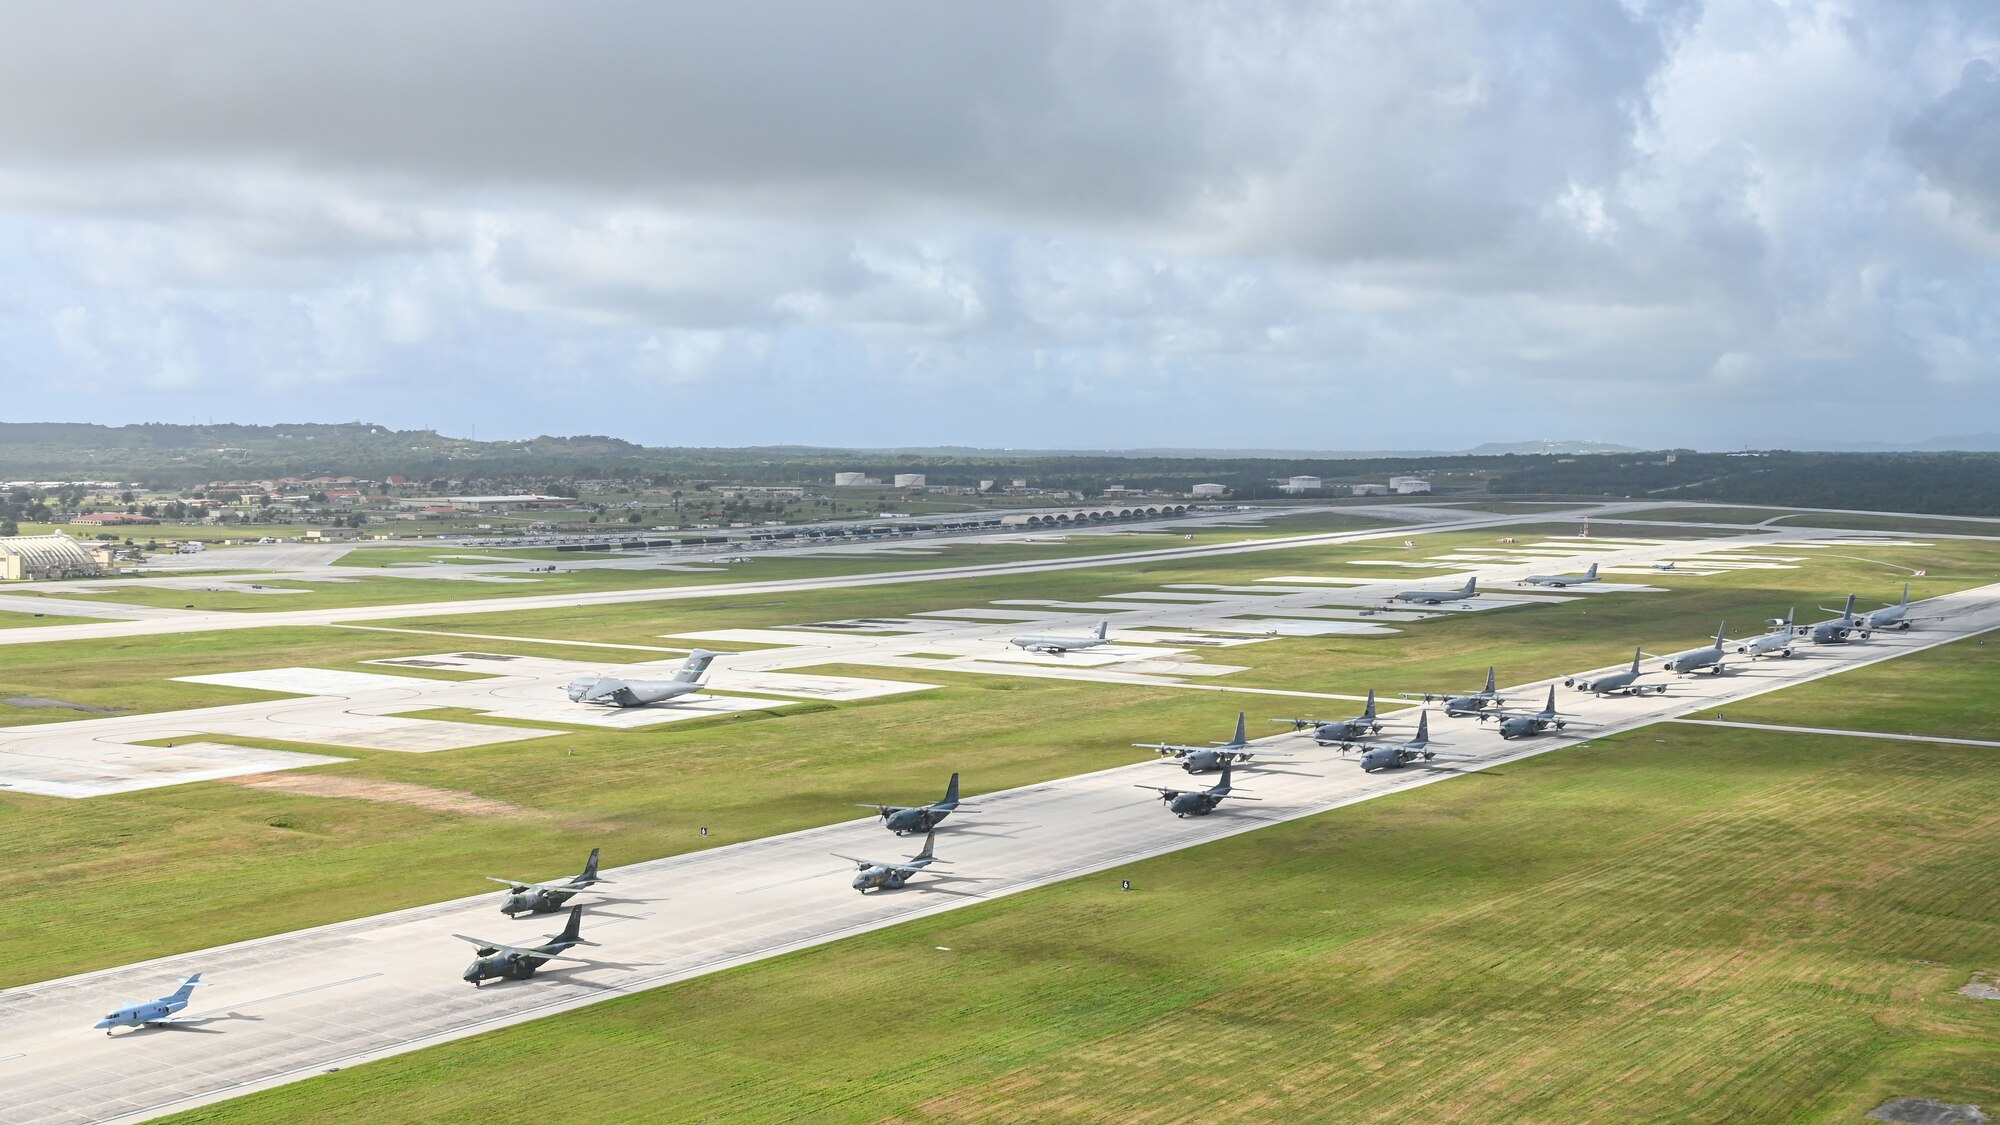 U.S. Air Force, Royal Australian Air Force, Japan Air Self-Defense Force, and regional allies and partners aircraft participate in a close formation taxi, known as an Elephant Walk, during Cope North 2022 at Andersen Air Force Base, Guam, Feb. 5, 2022.